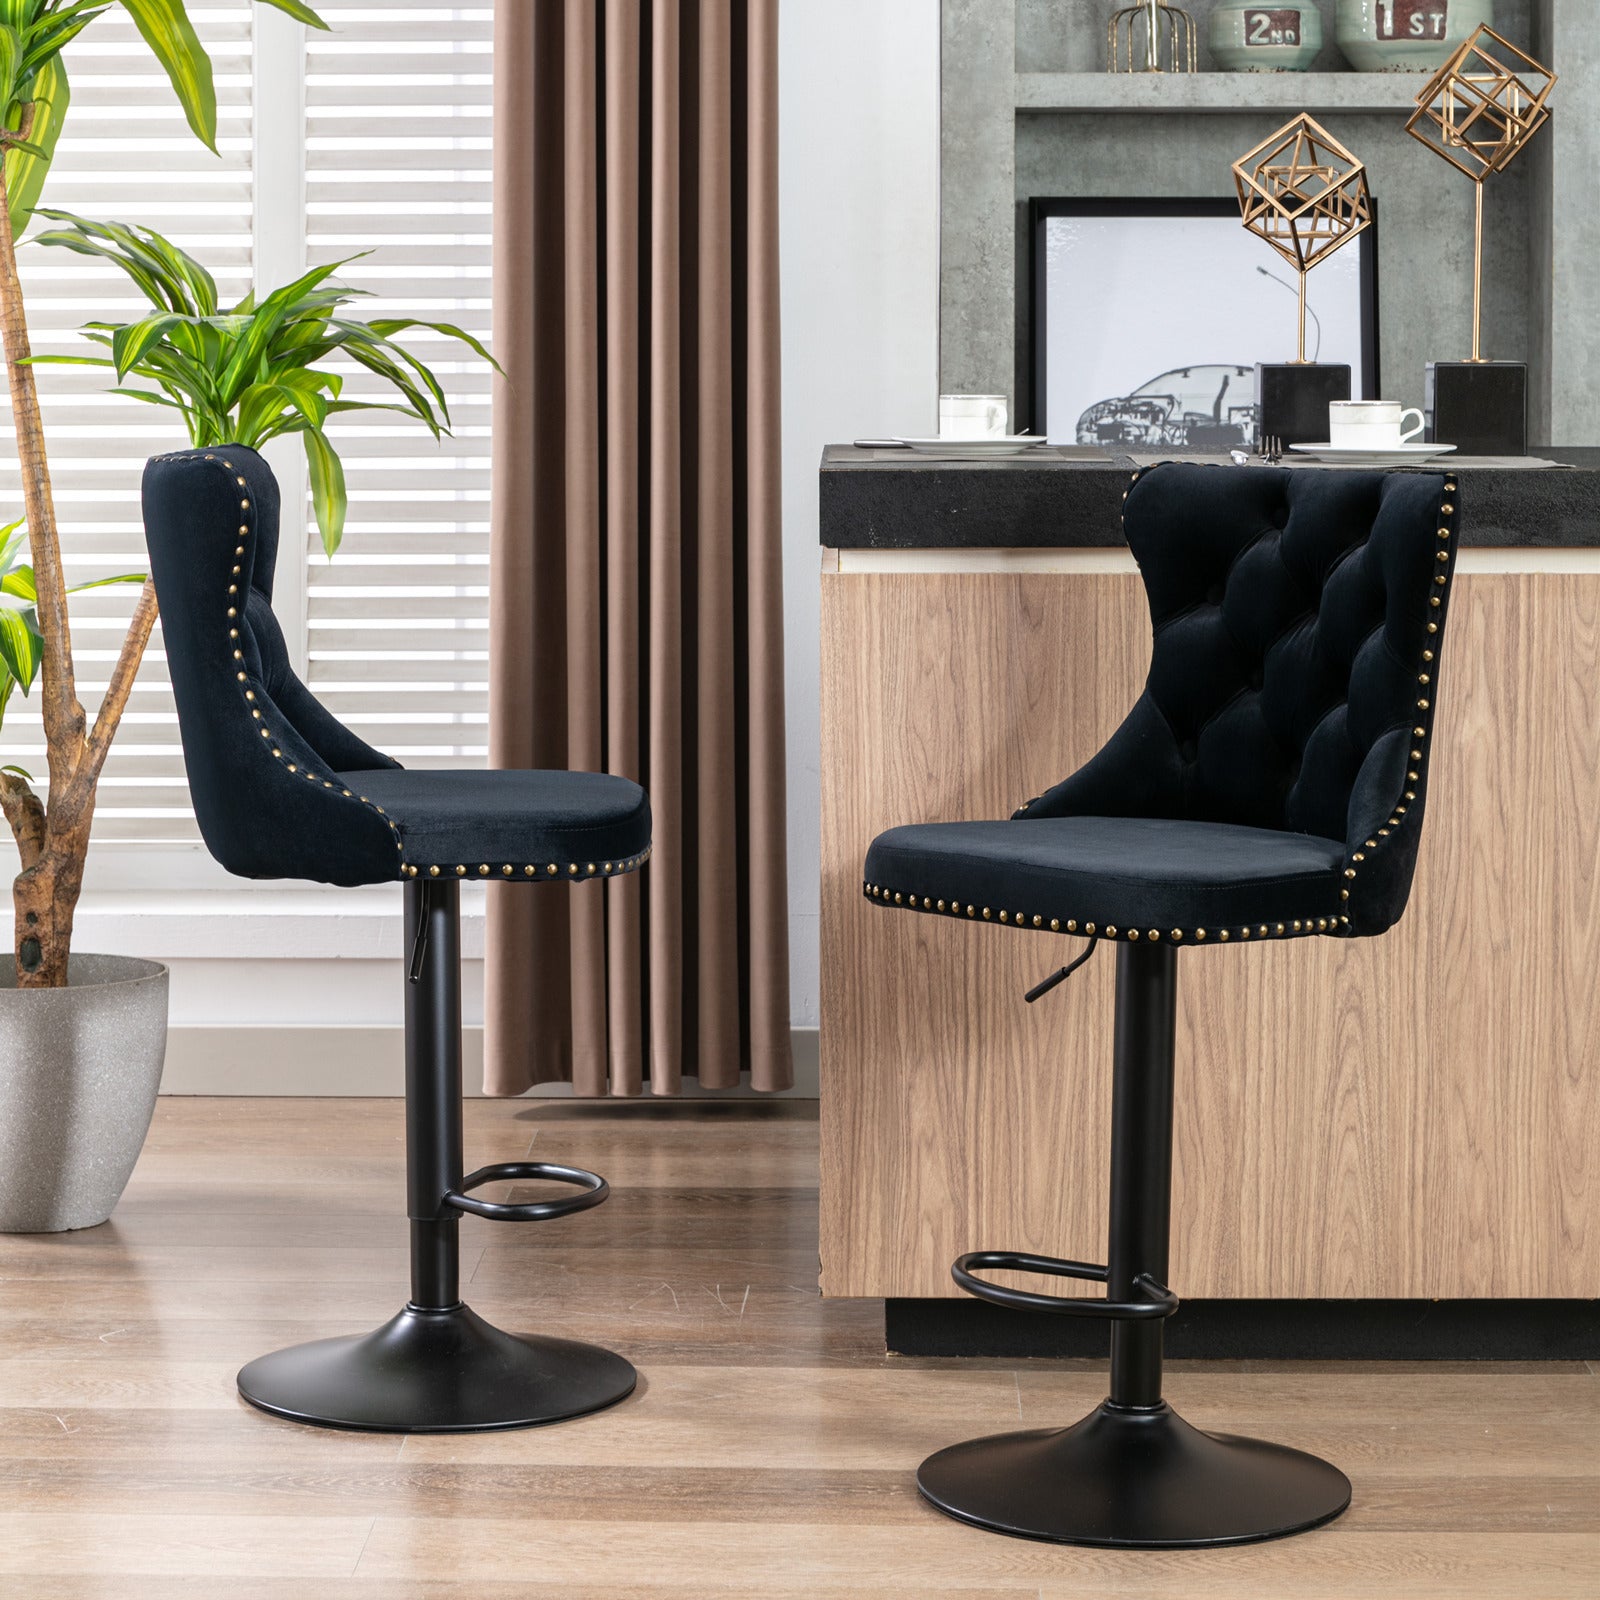 A&A Furniture,Swivel Velvet Barstools Adjusatble Seat Height from 25-33 Inch,17.7 inch base, Modern Upholstered Bar Stools with Backs Comfortable Tufted for Home Pub and Kitchen Island,Black,Set of 2